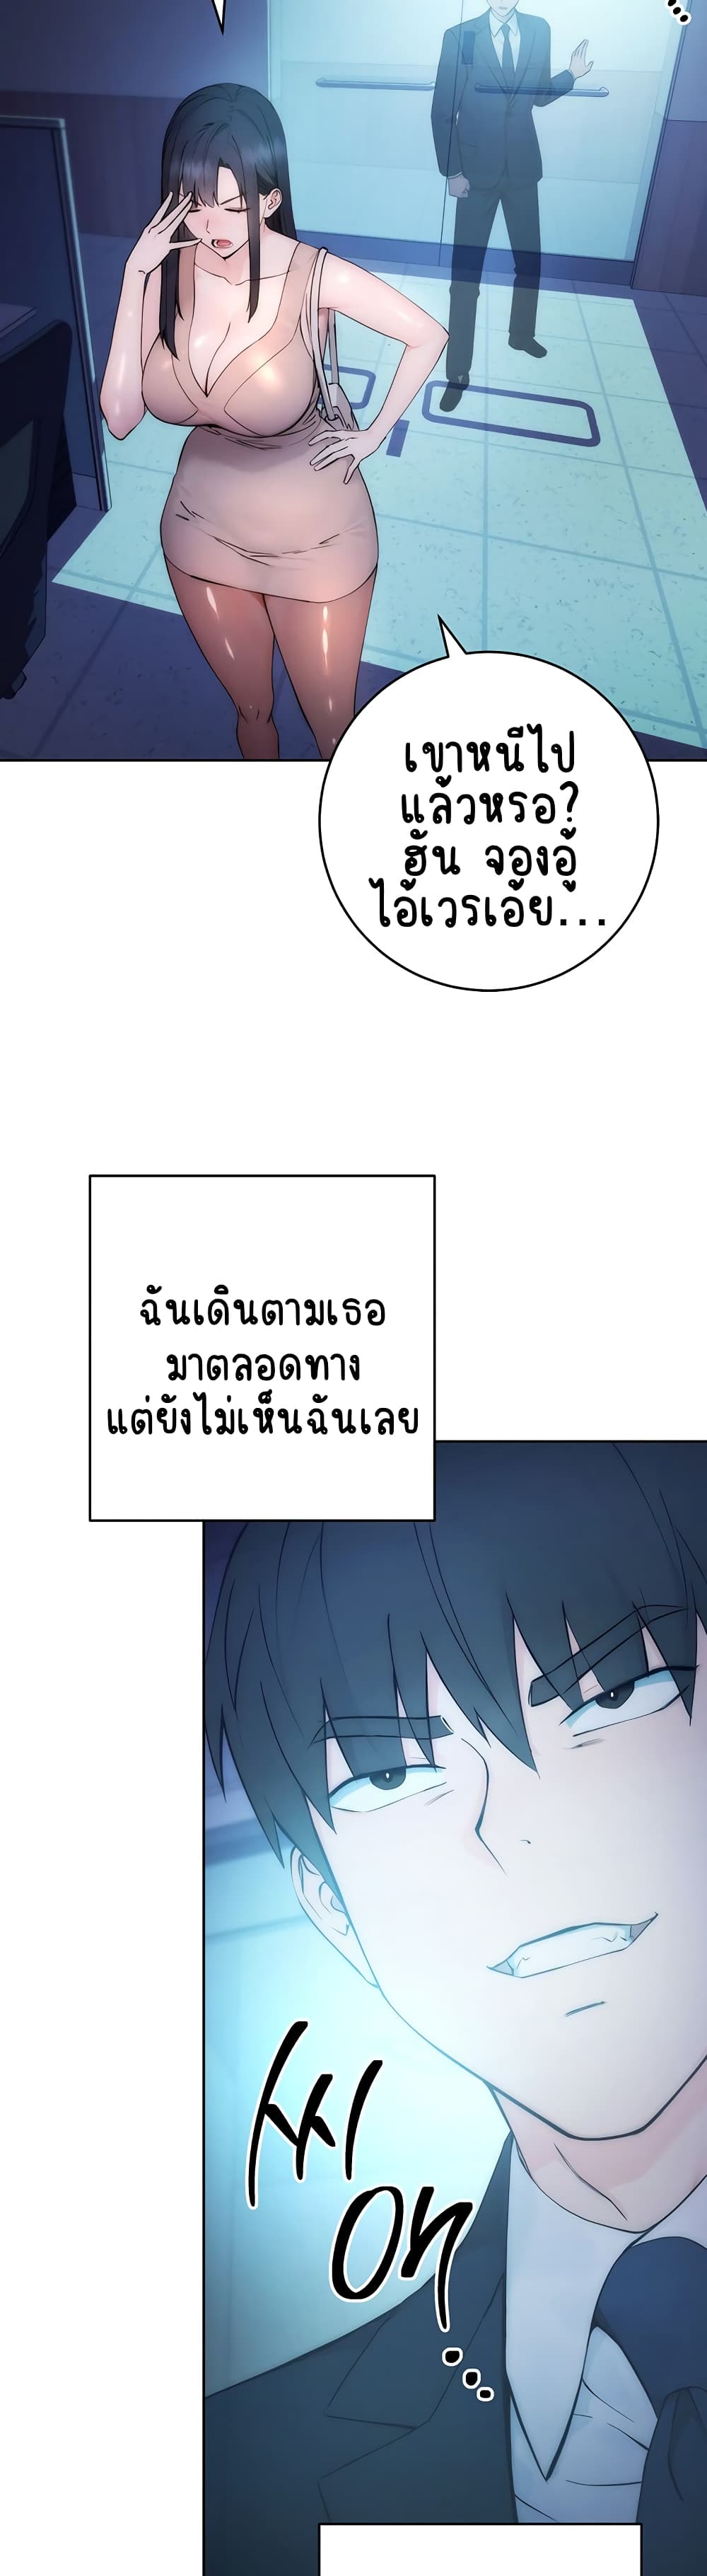 Outsider: The Invisible Man ตอนที่ 1 ภาพ 75